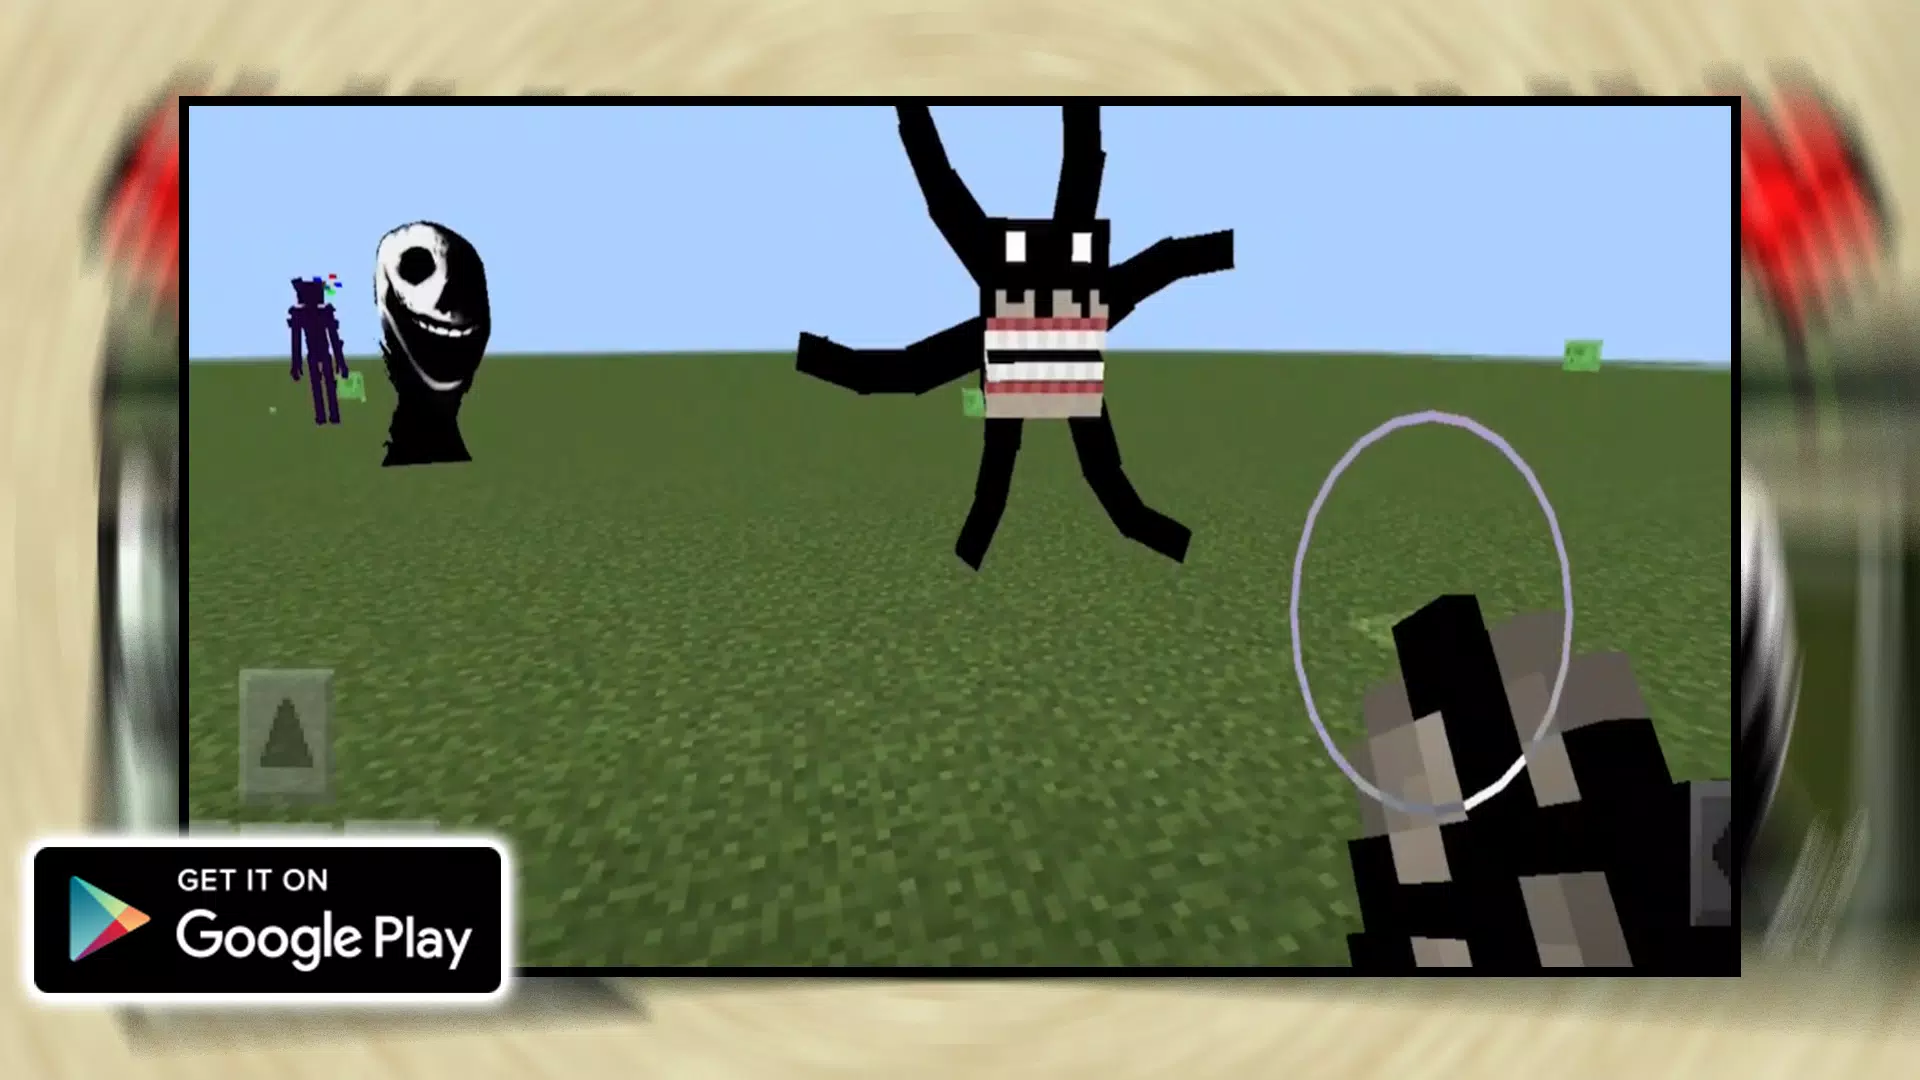 Roblox Scary Doors Mod in MCPE for Android - Free App Download